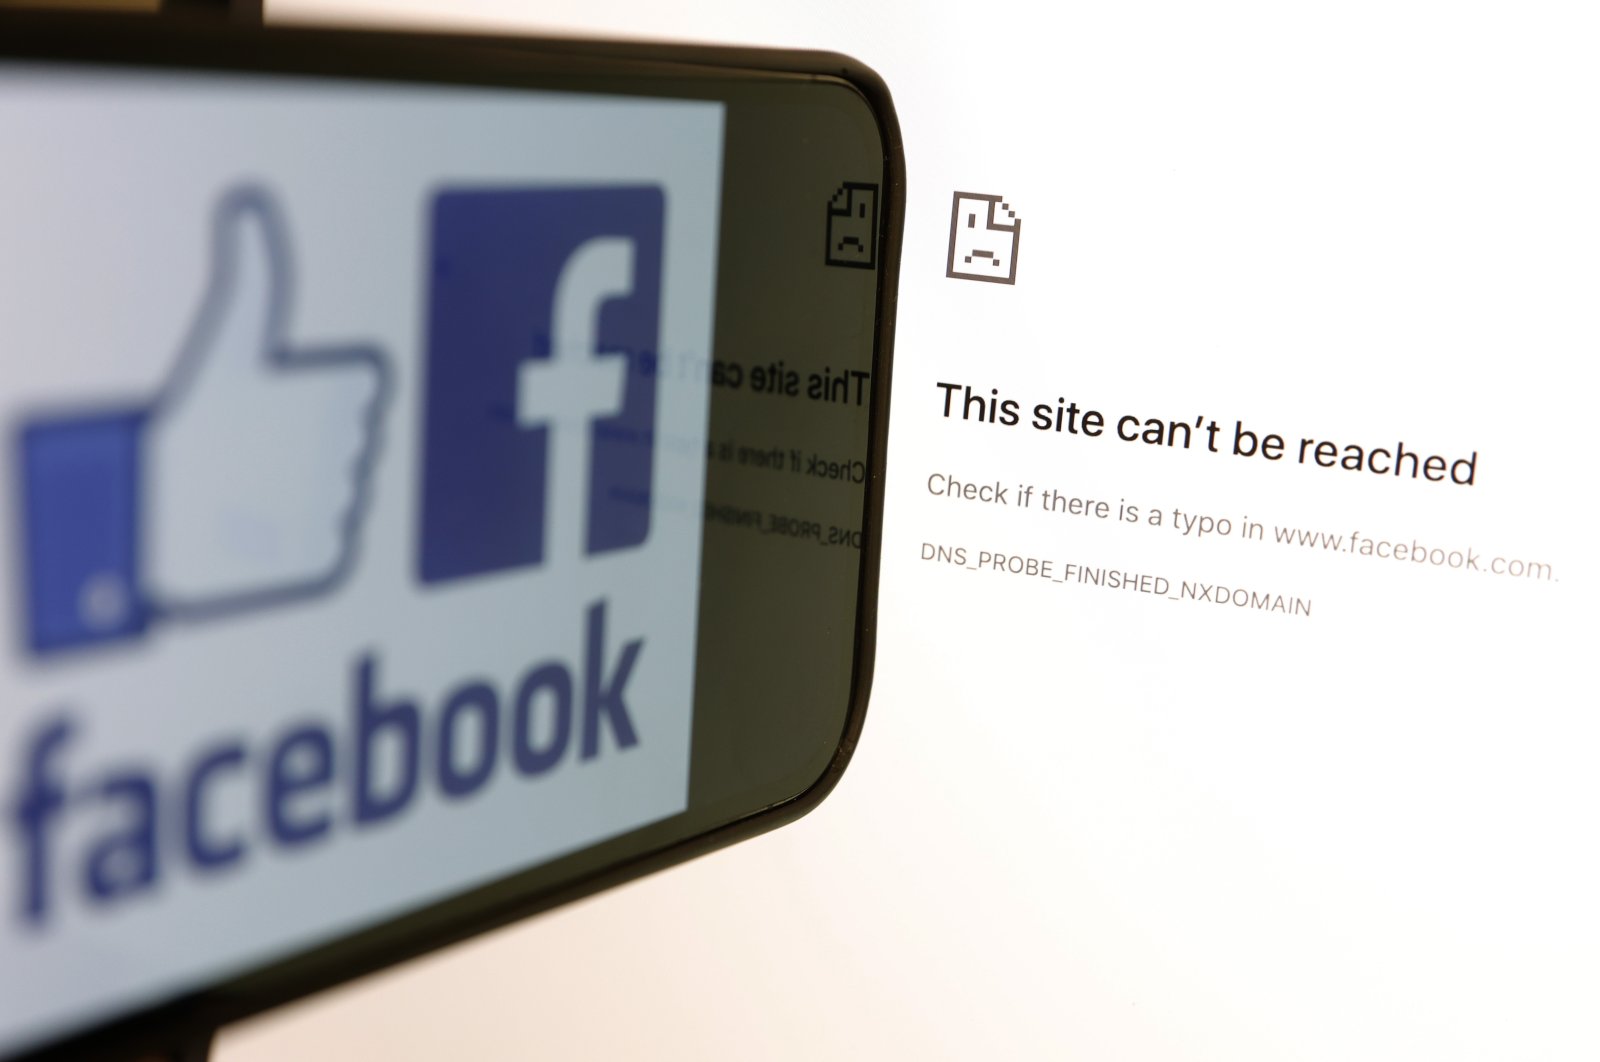 The Facebook logo is displayed next to a screen showing that Facebook service is down on Oct. 4, 2021 in San Anselmo, California. (Photo Illustration by Justin Sullivan/Getty Images)